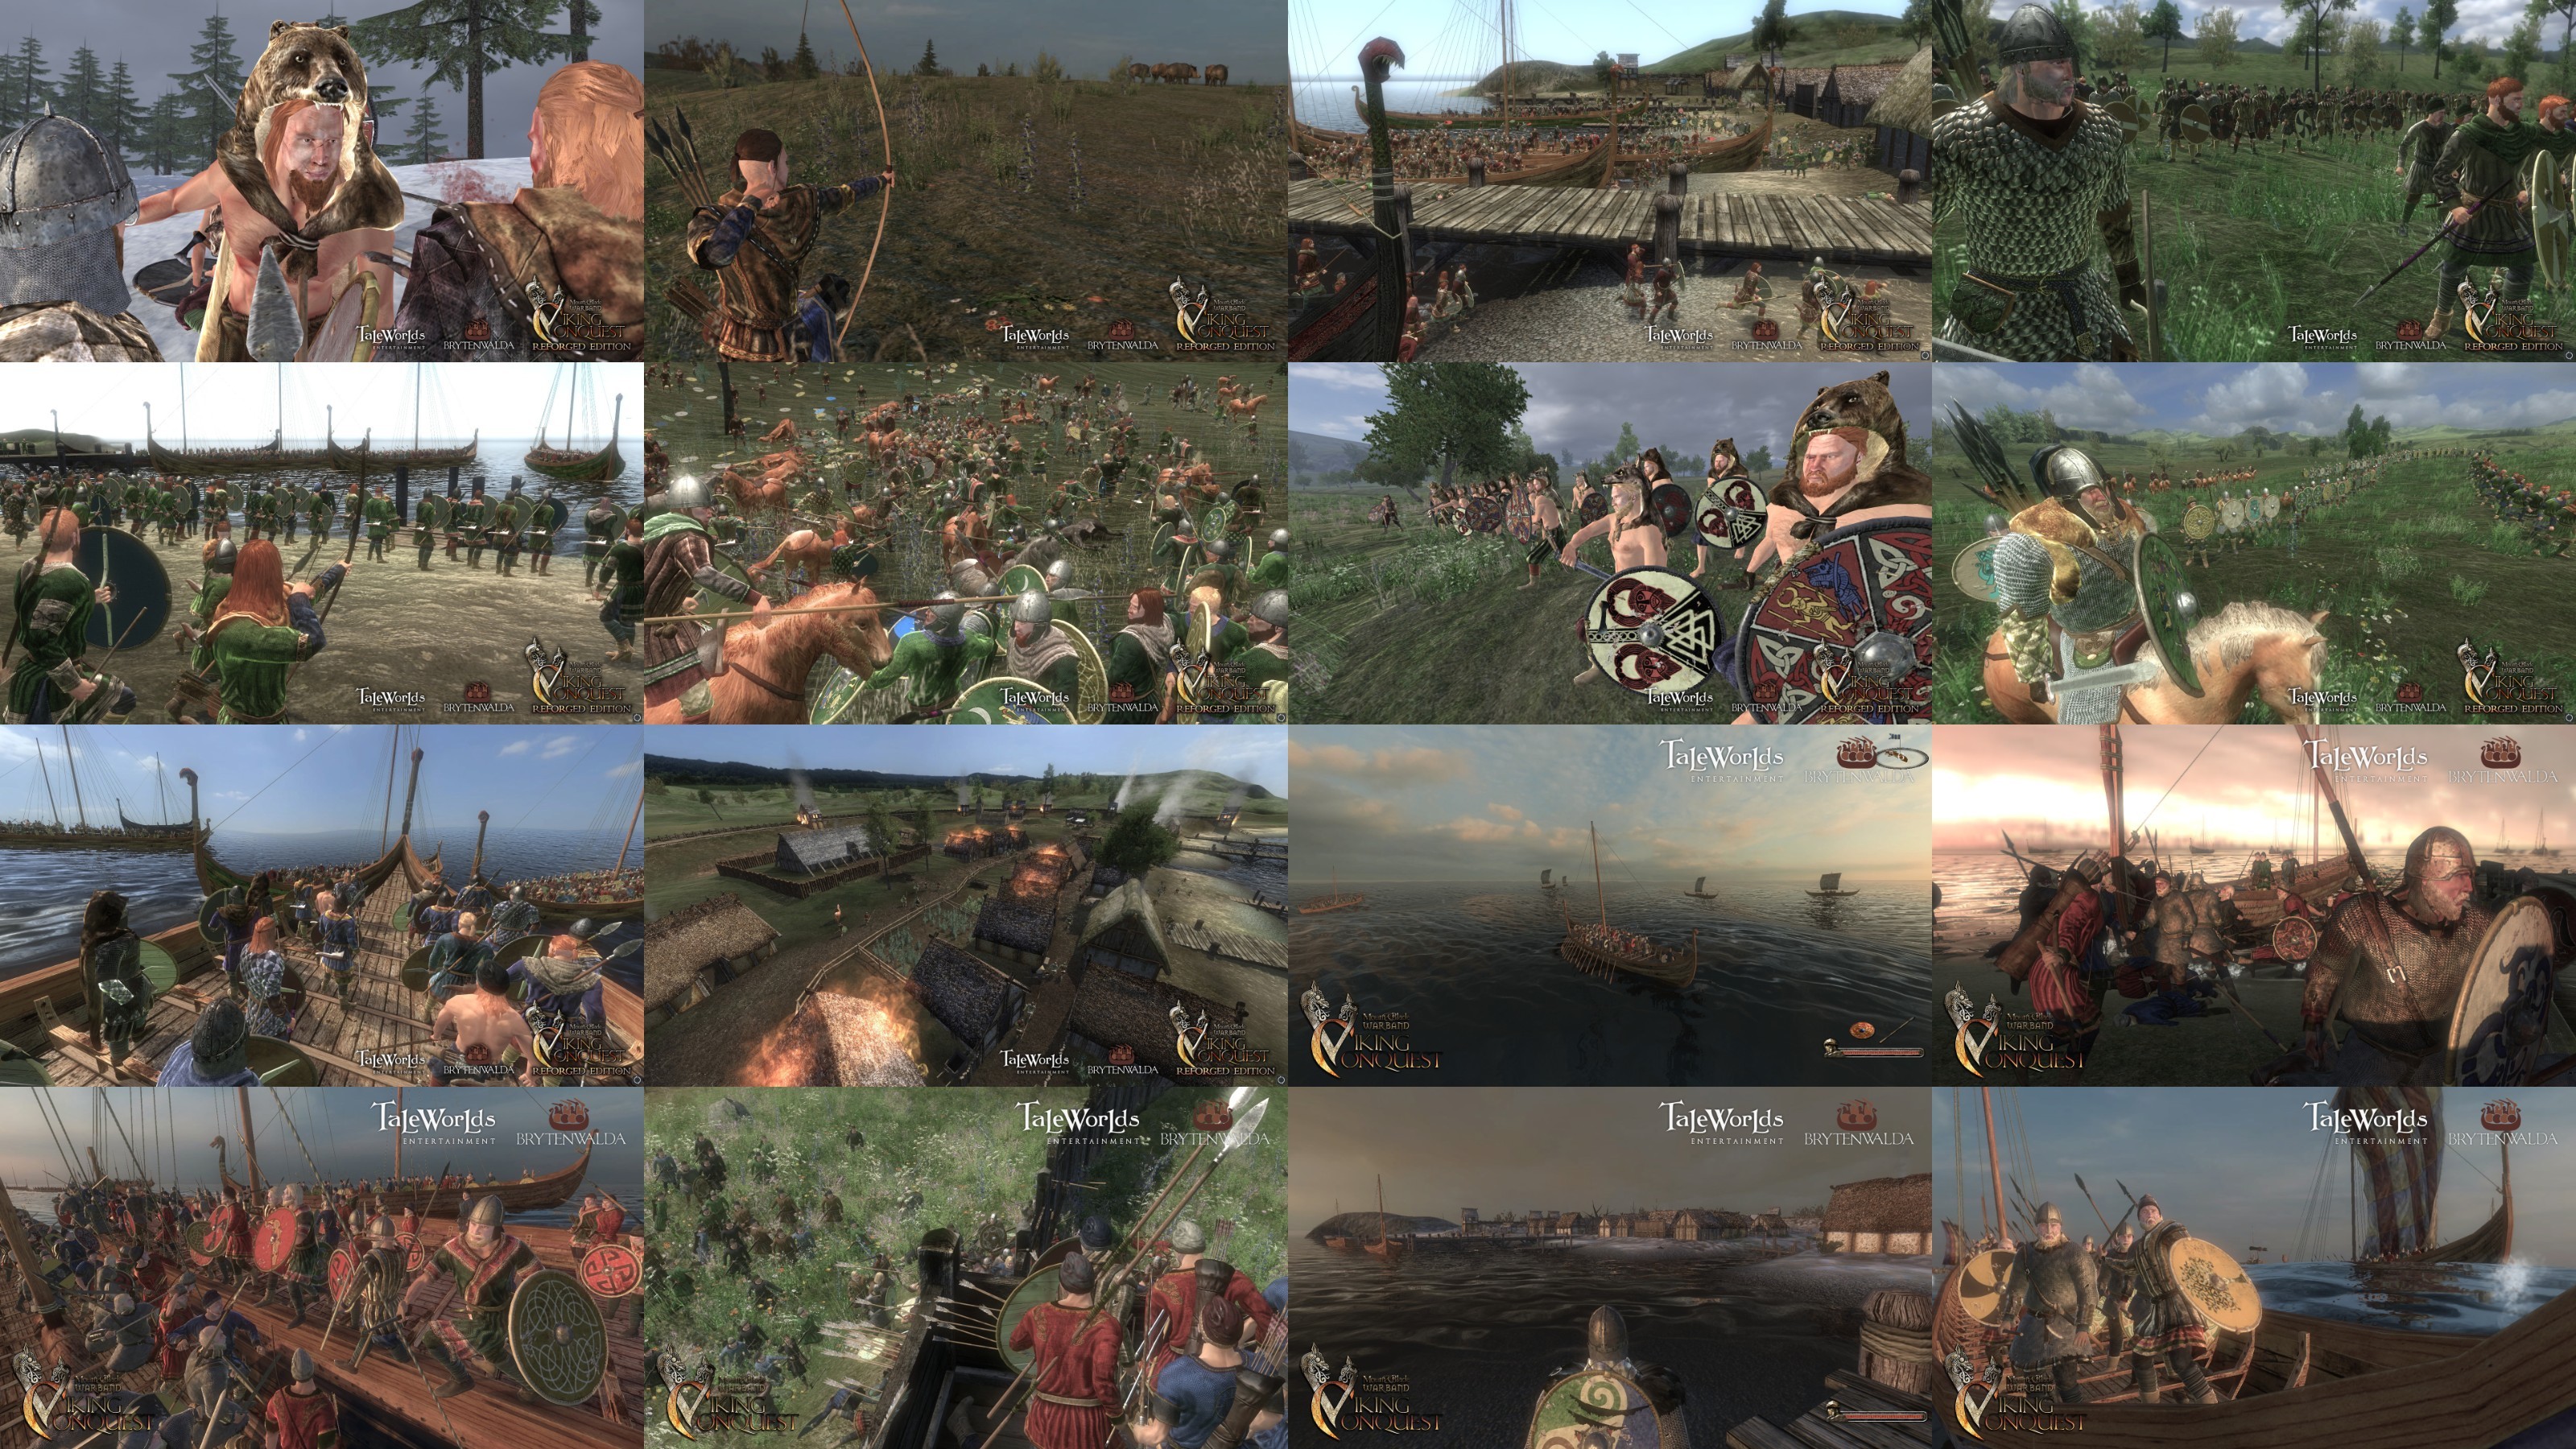 Mount And Blade Warband Viking Conquest Reforged Edition V1.174-Dinobytes